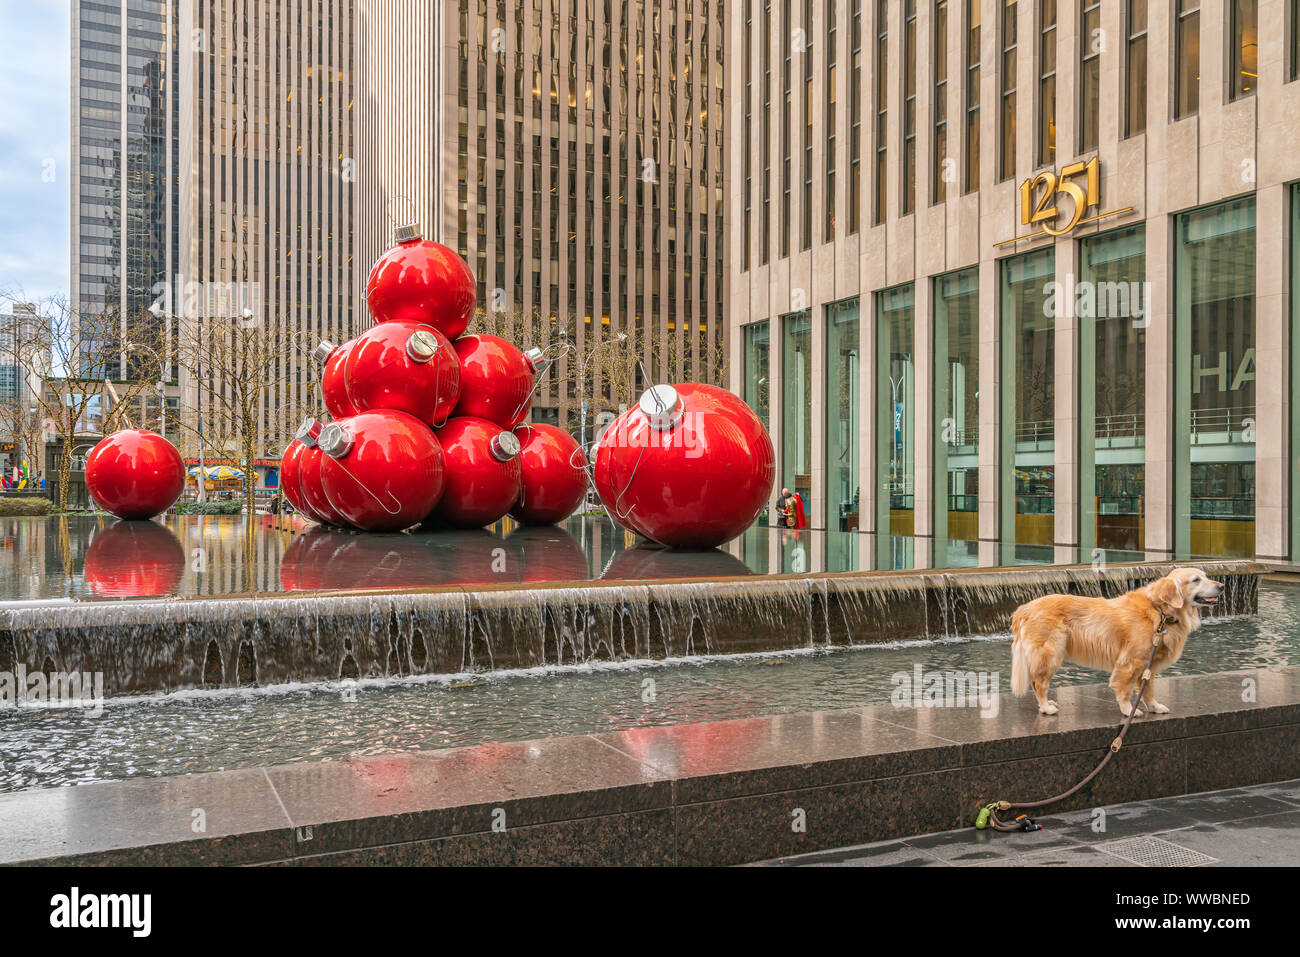 New York, NY, USA - December, 25th, 2018 - Beautiful Golden Retriever dog walking around Sixth Avenue near the huge red Christmas decoration balls in Stock Photo